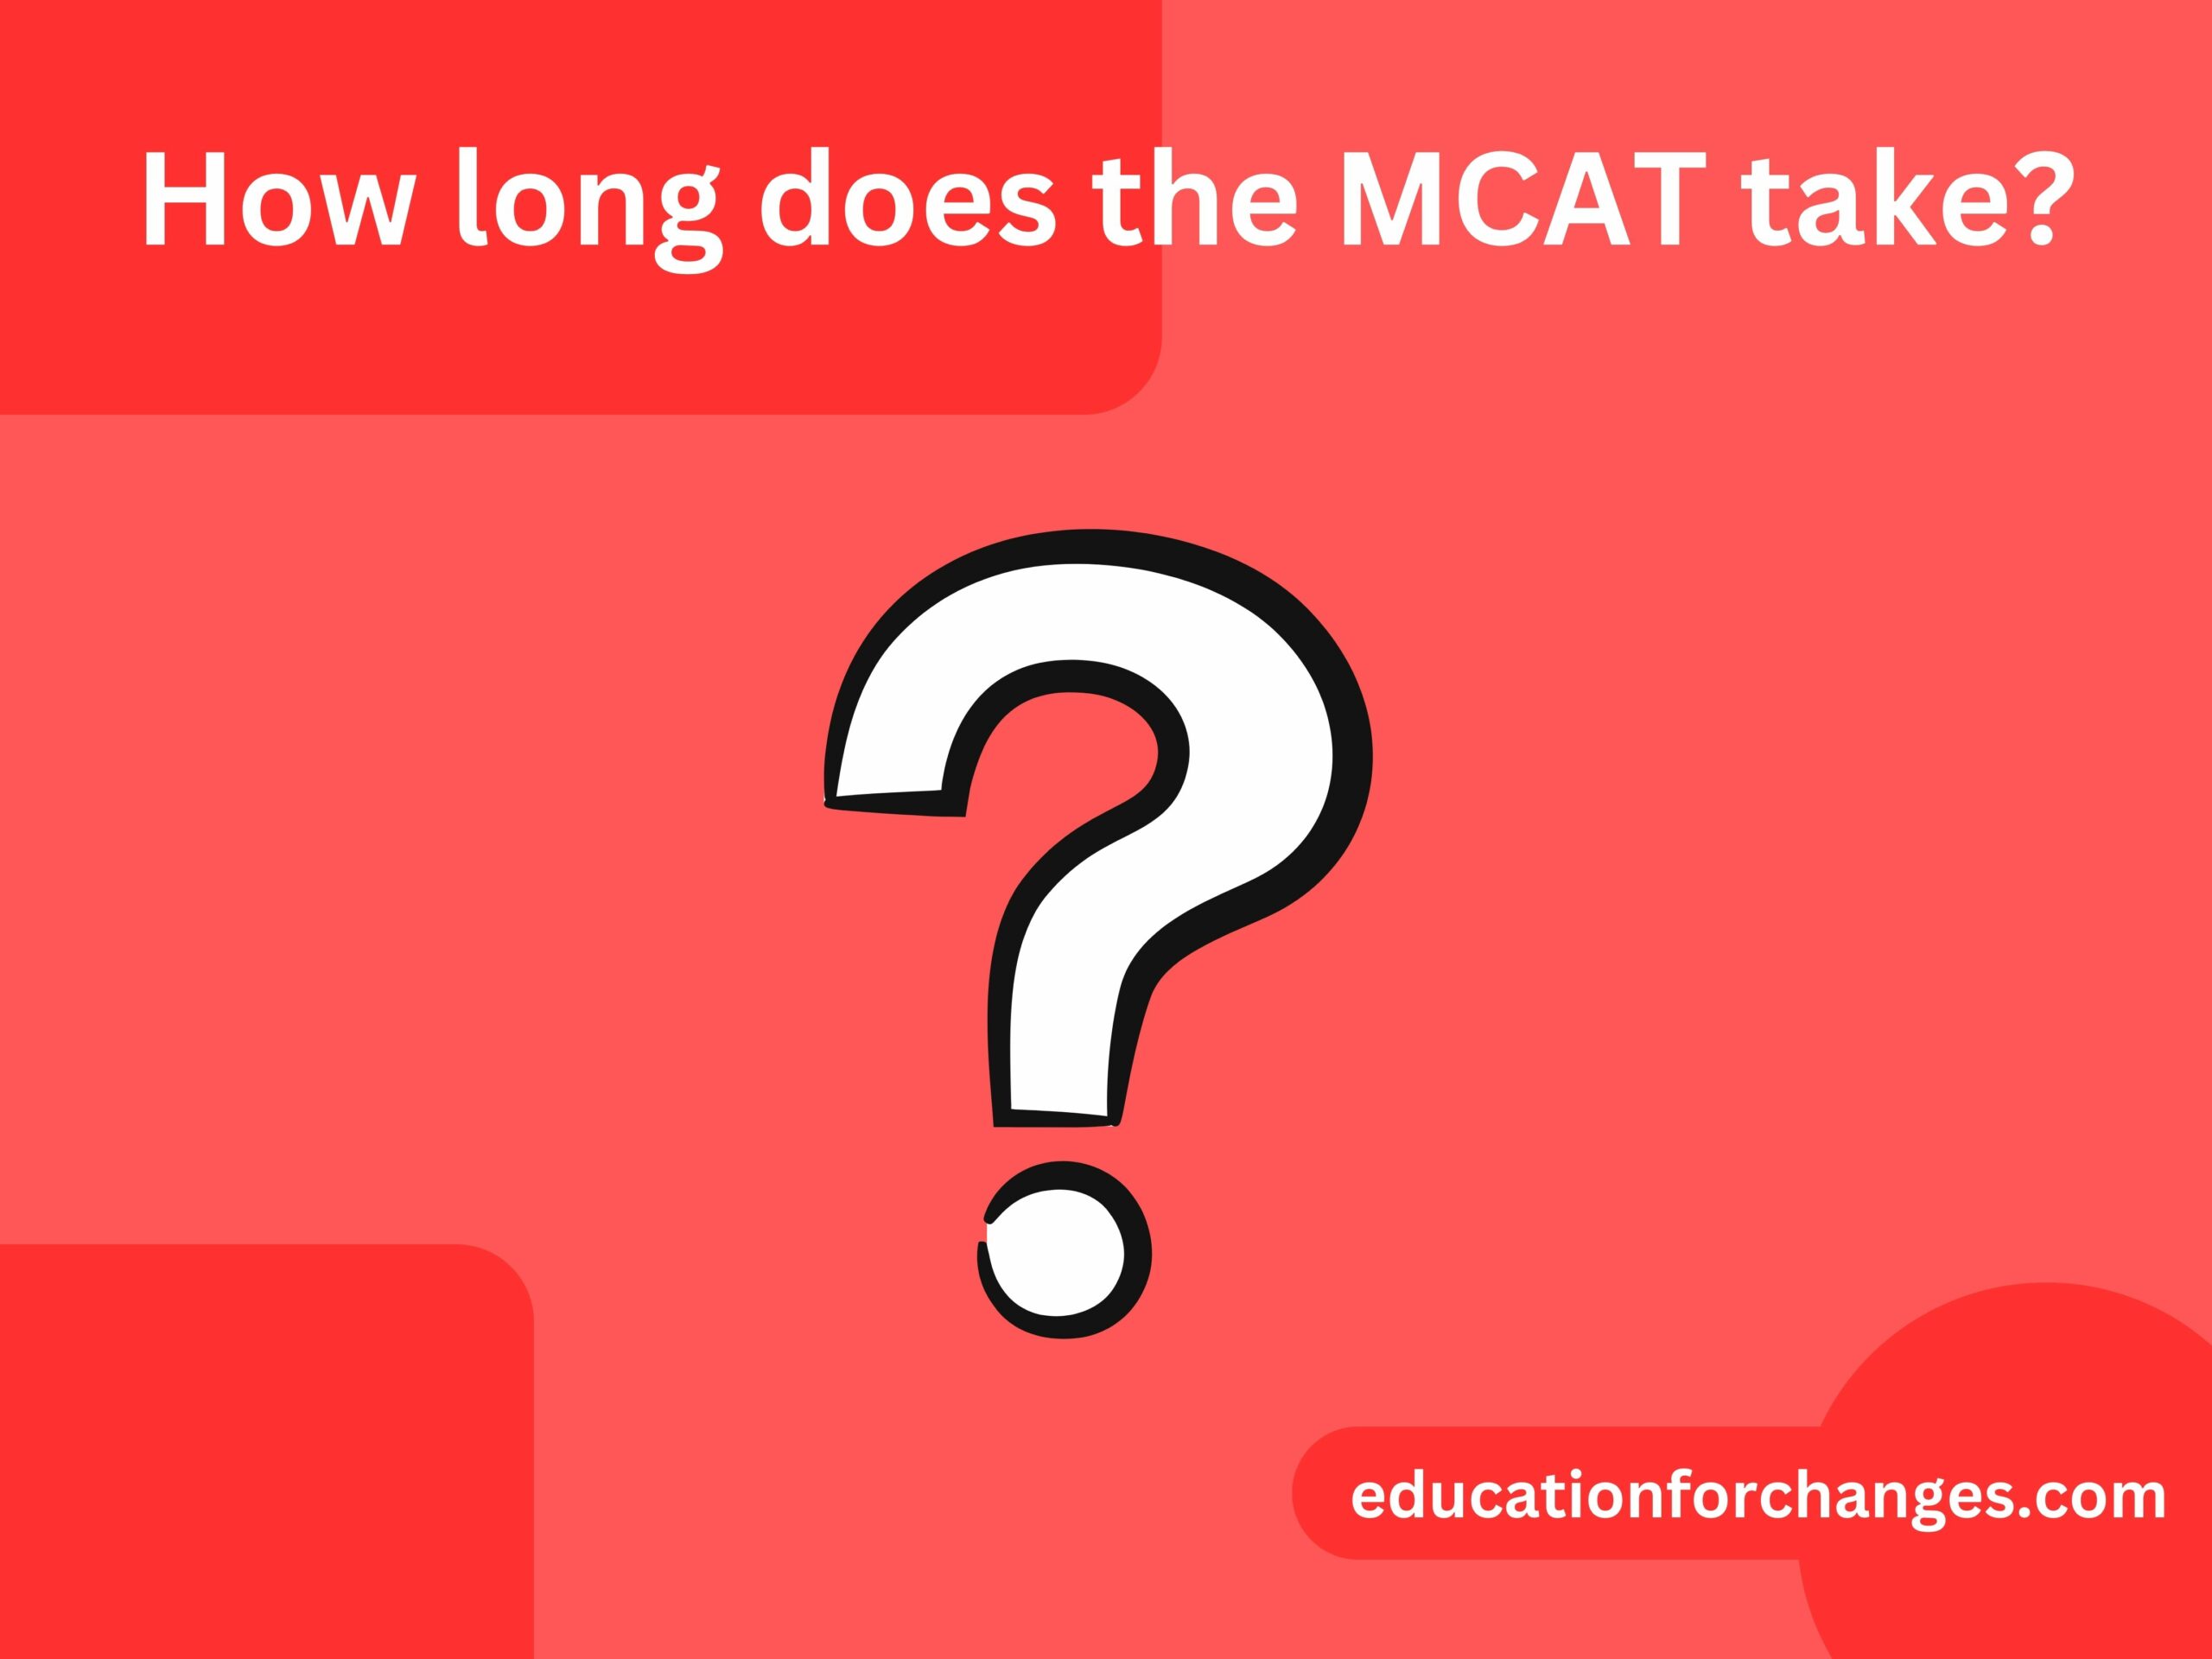 How long does the MCAT take